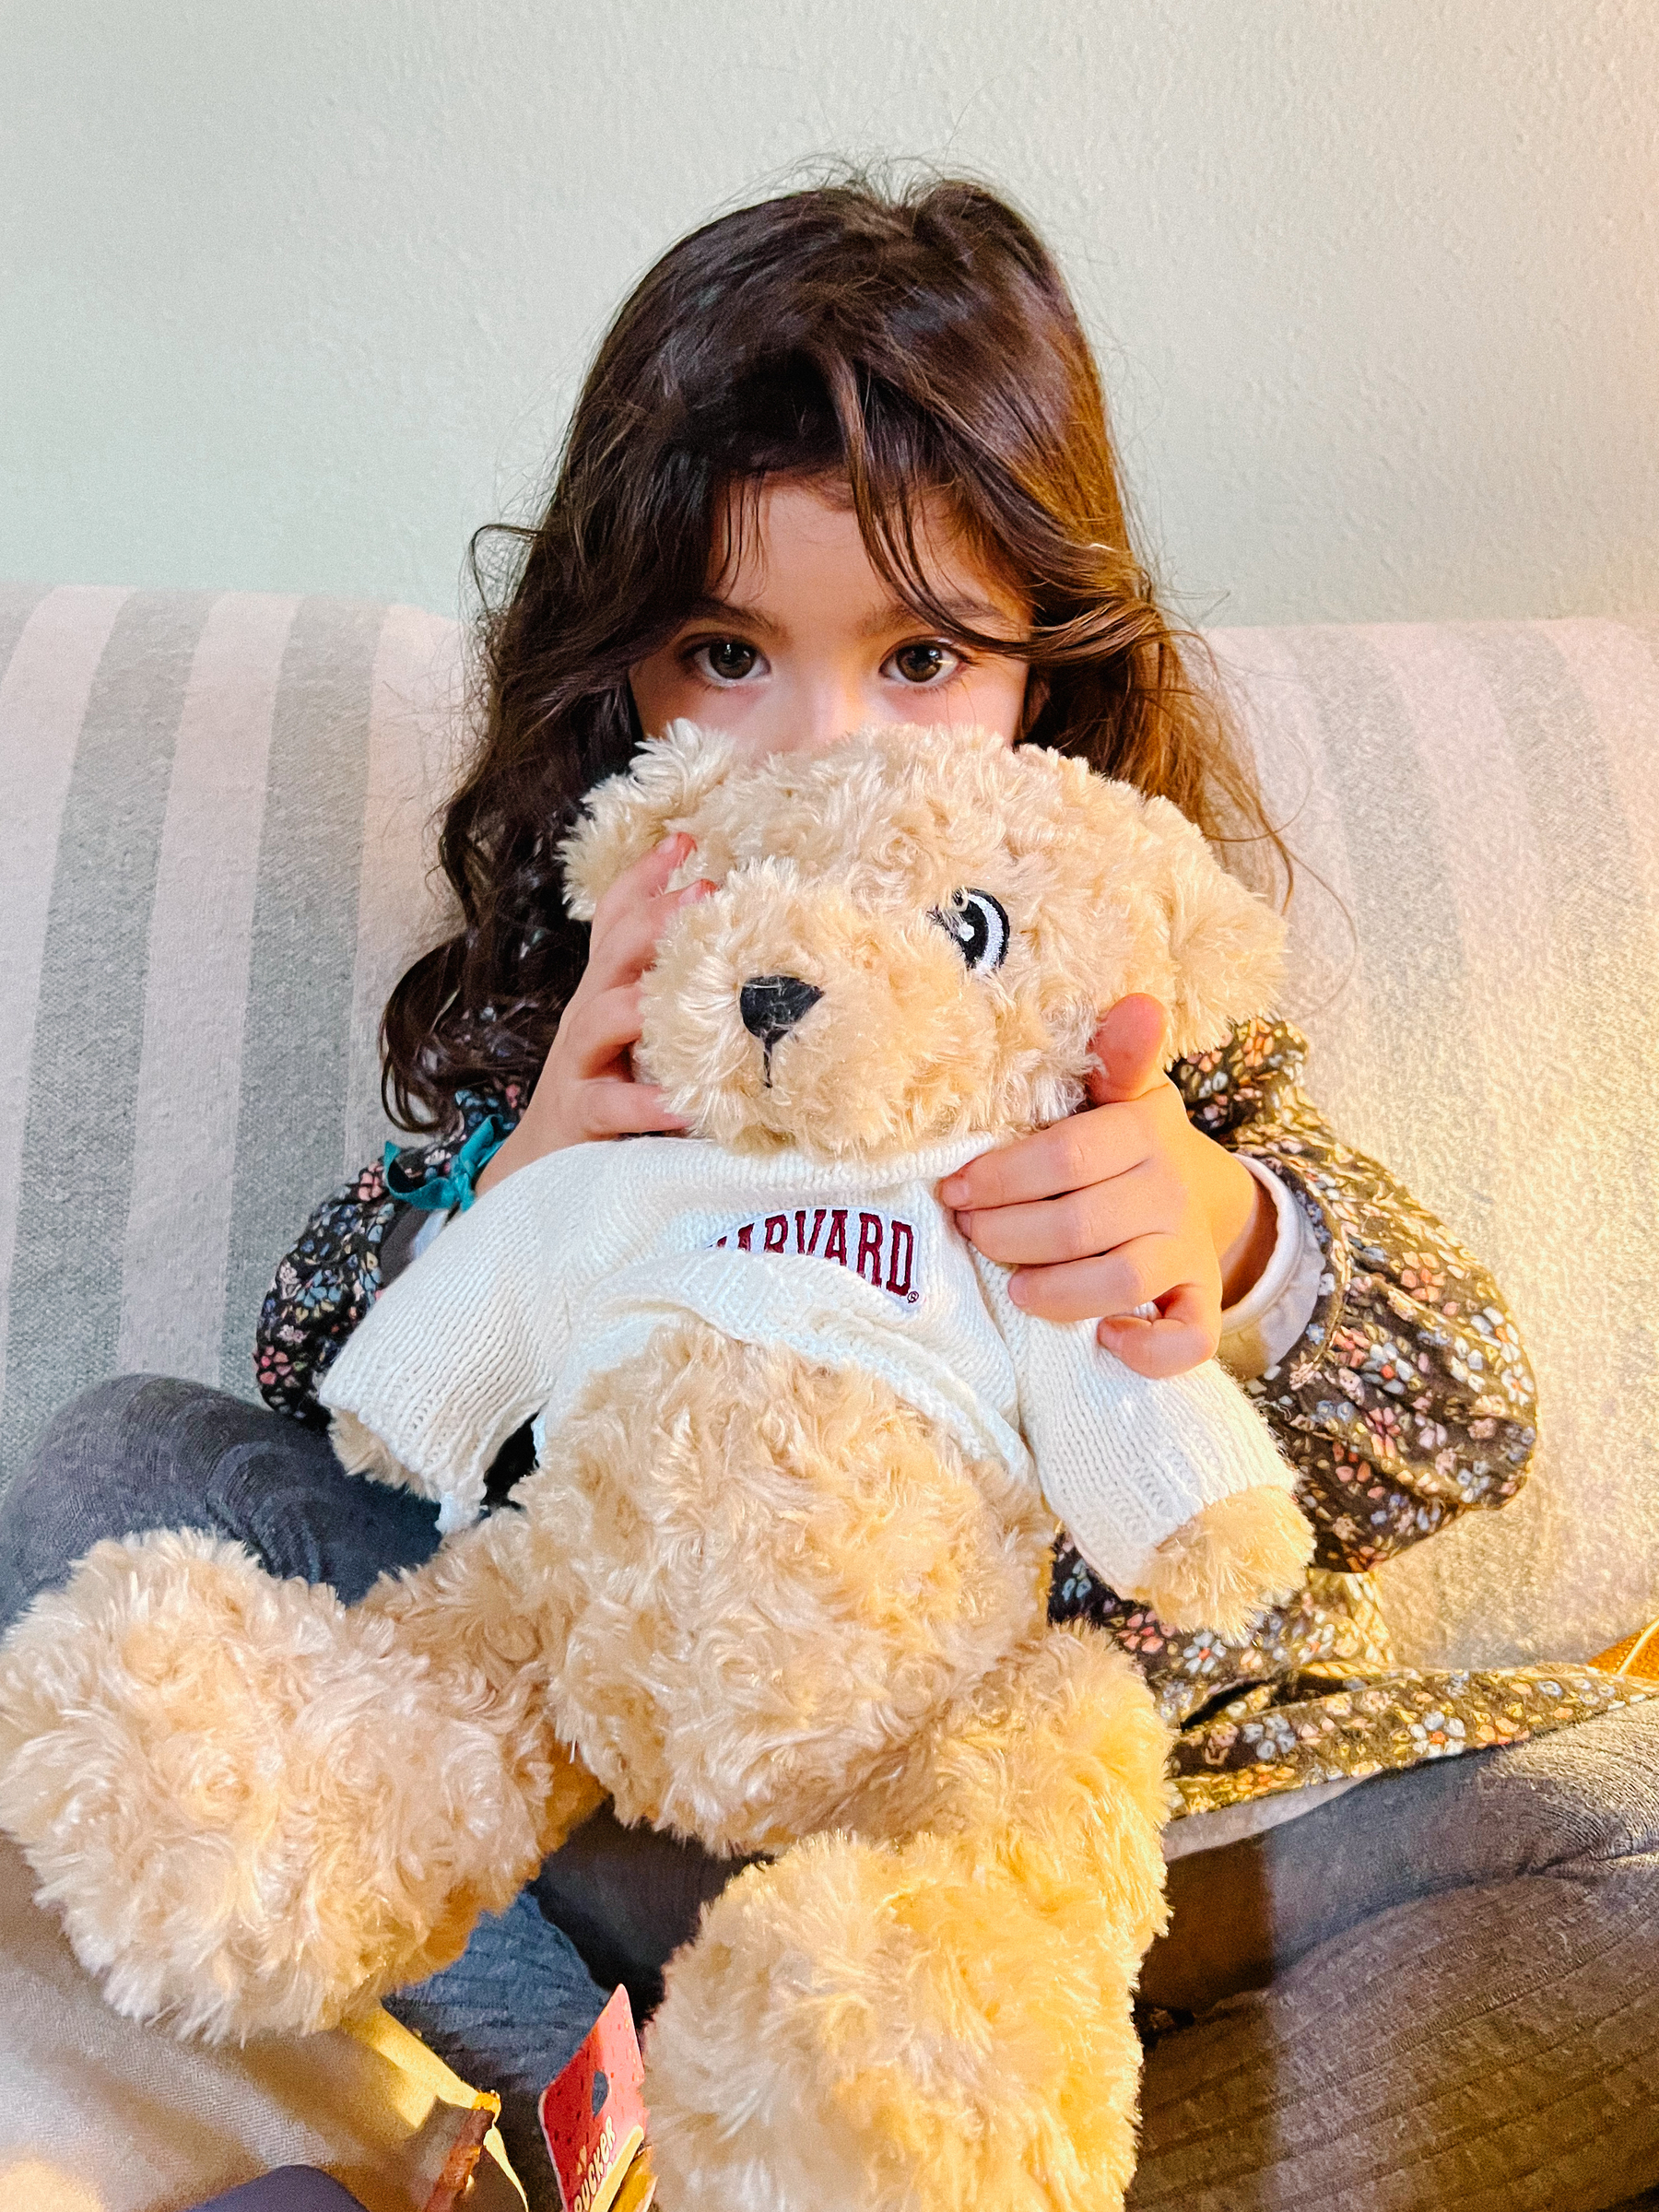 A young child holding a teddy bear while sitting on a couch.